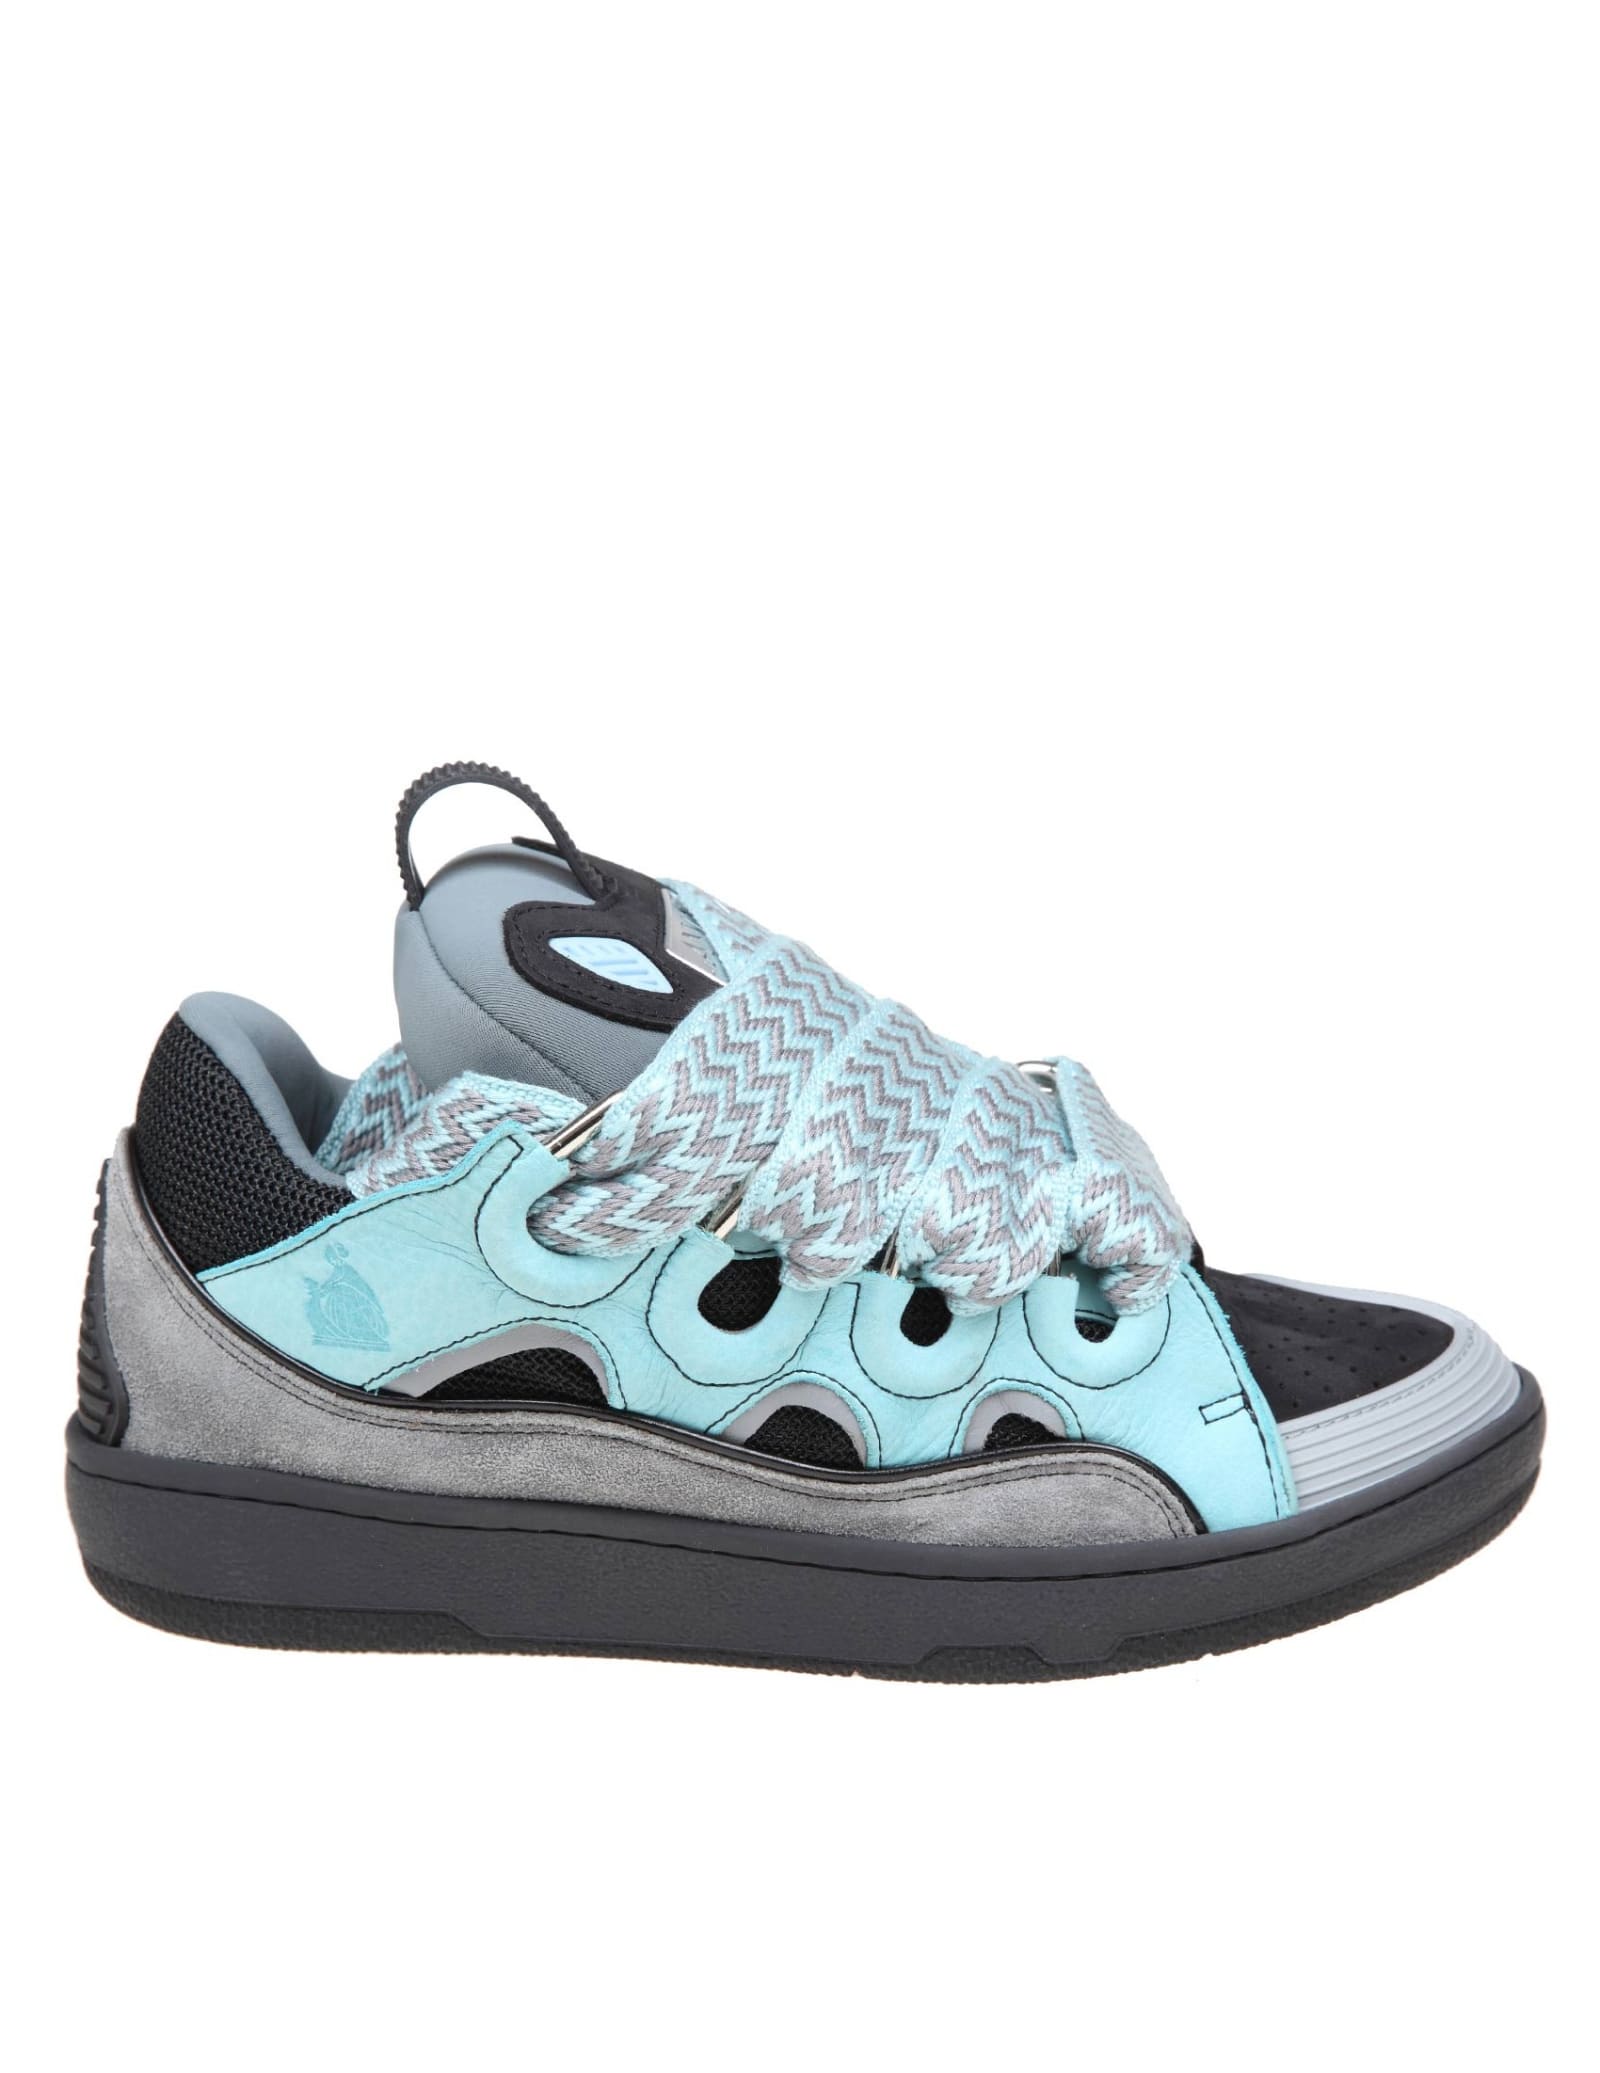 Shop Lanvin Curb Sneakers In Suede And Fabric Color Light Blue/anthracite In Light/blue/anthracite